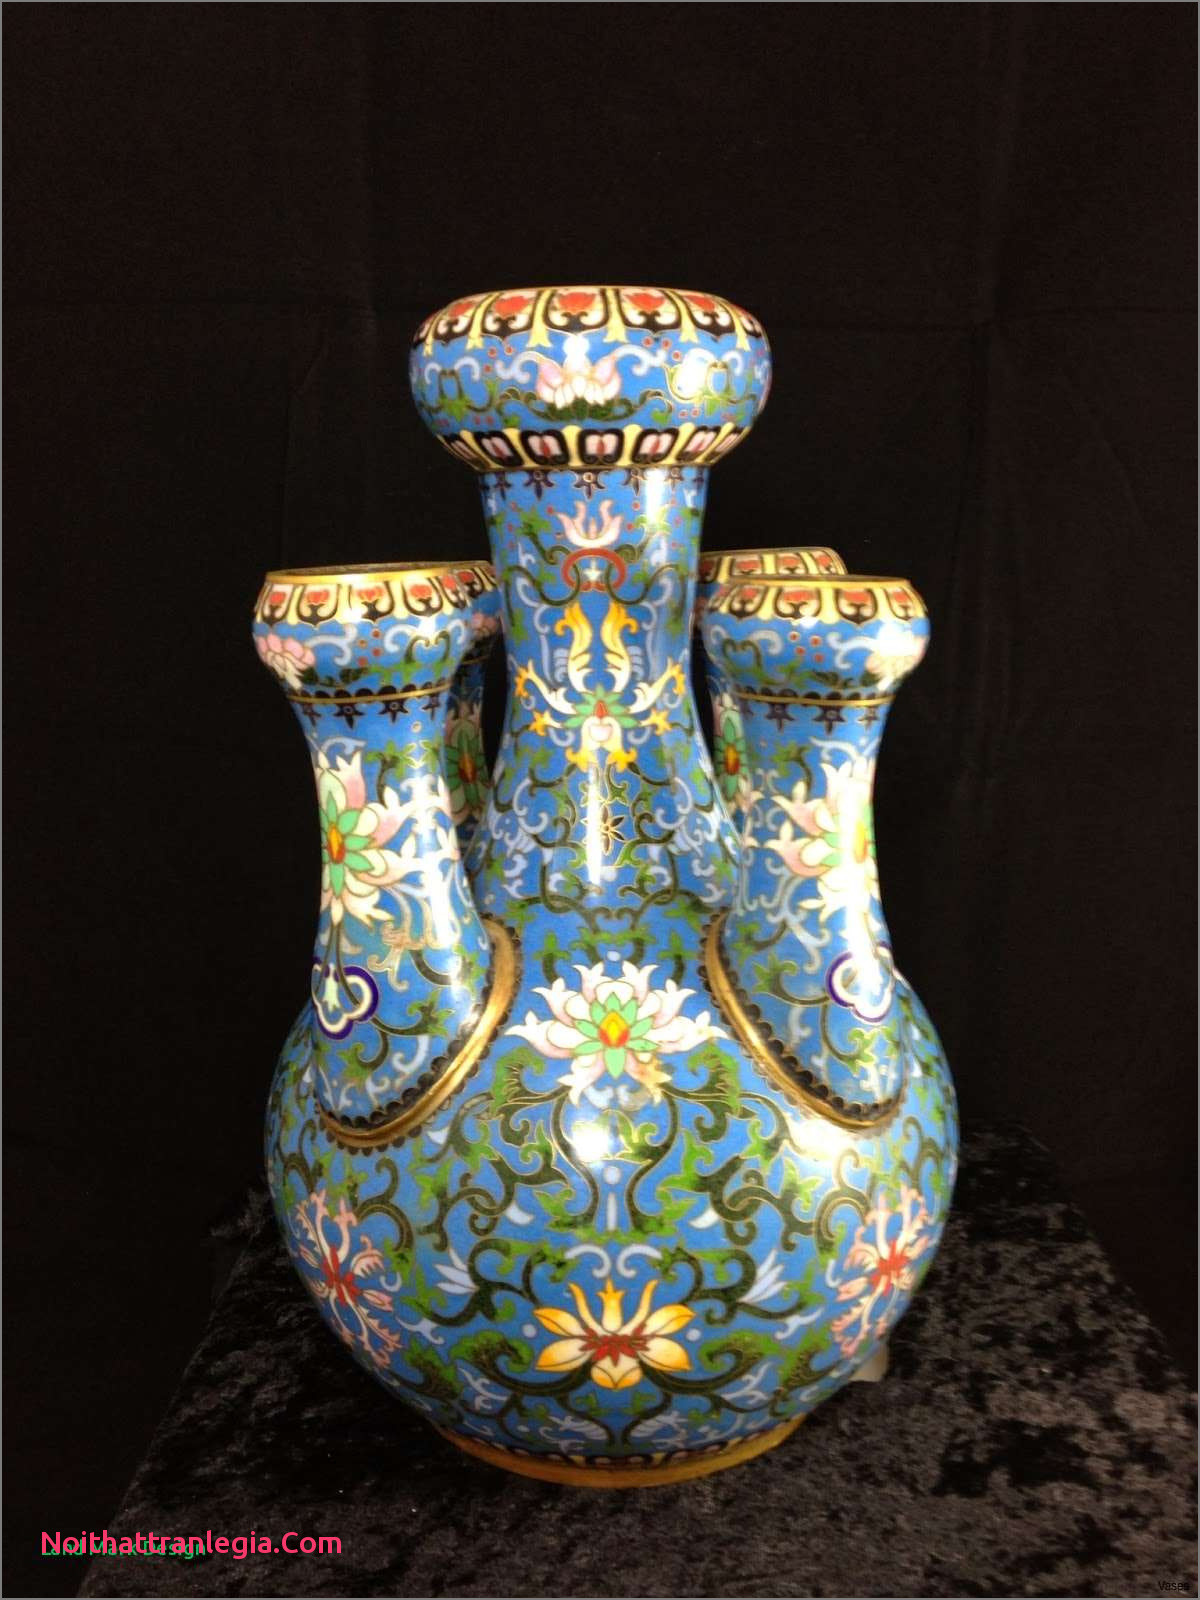 30 Wonderful Chinese Vases for Sale Uk 2024 free download chinese vases for sale uk of 20 chinese antique vase noithattranlegia vases design for 213 1h vases antique asian the increased trade of chinese ware during 16th century has significantly